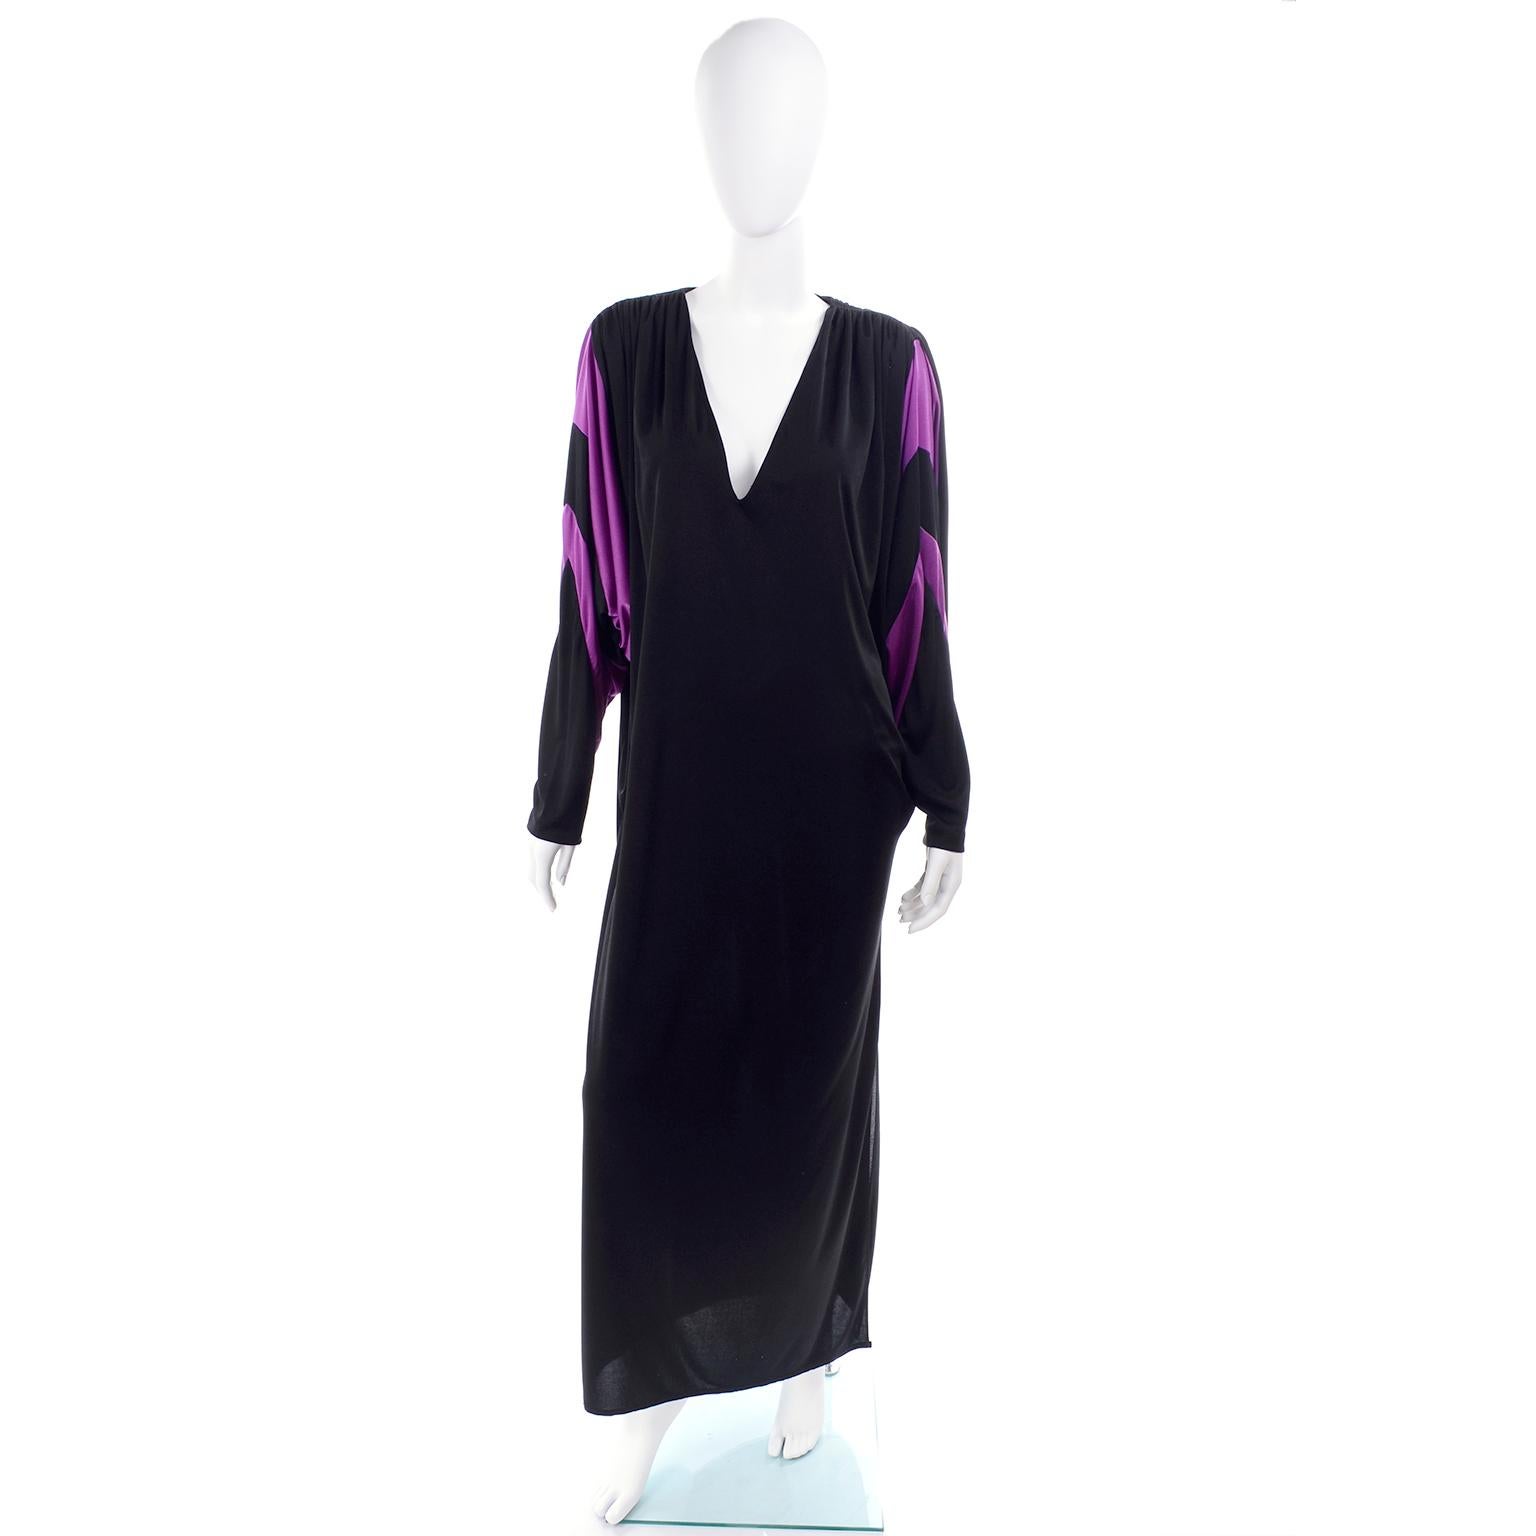 This is a great vintage dress designed by Bill Tice in the late 1970's This full length dress is black with dramatic purple stripes on the exaggerated leg of mutton batwing sleeves. The dress is in a jersey fabric that is draped on the side with a